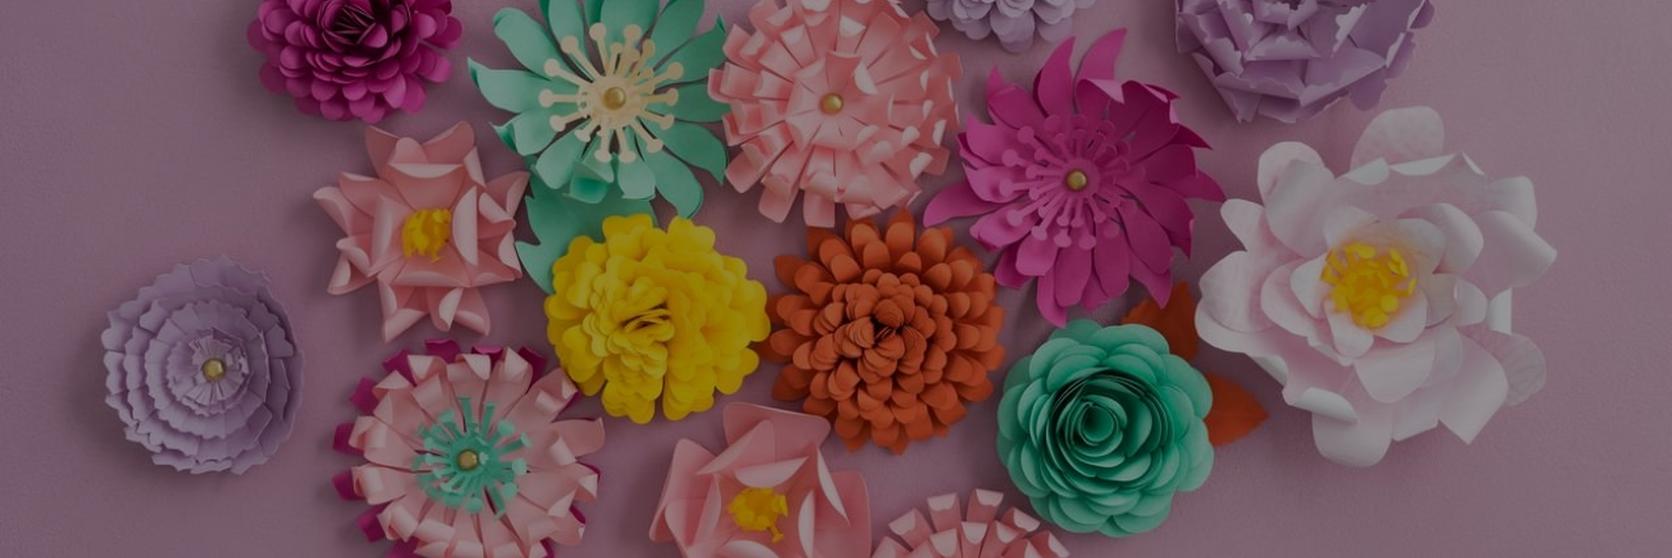 How-to-make-paper-flowers-1